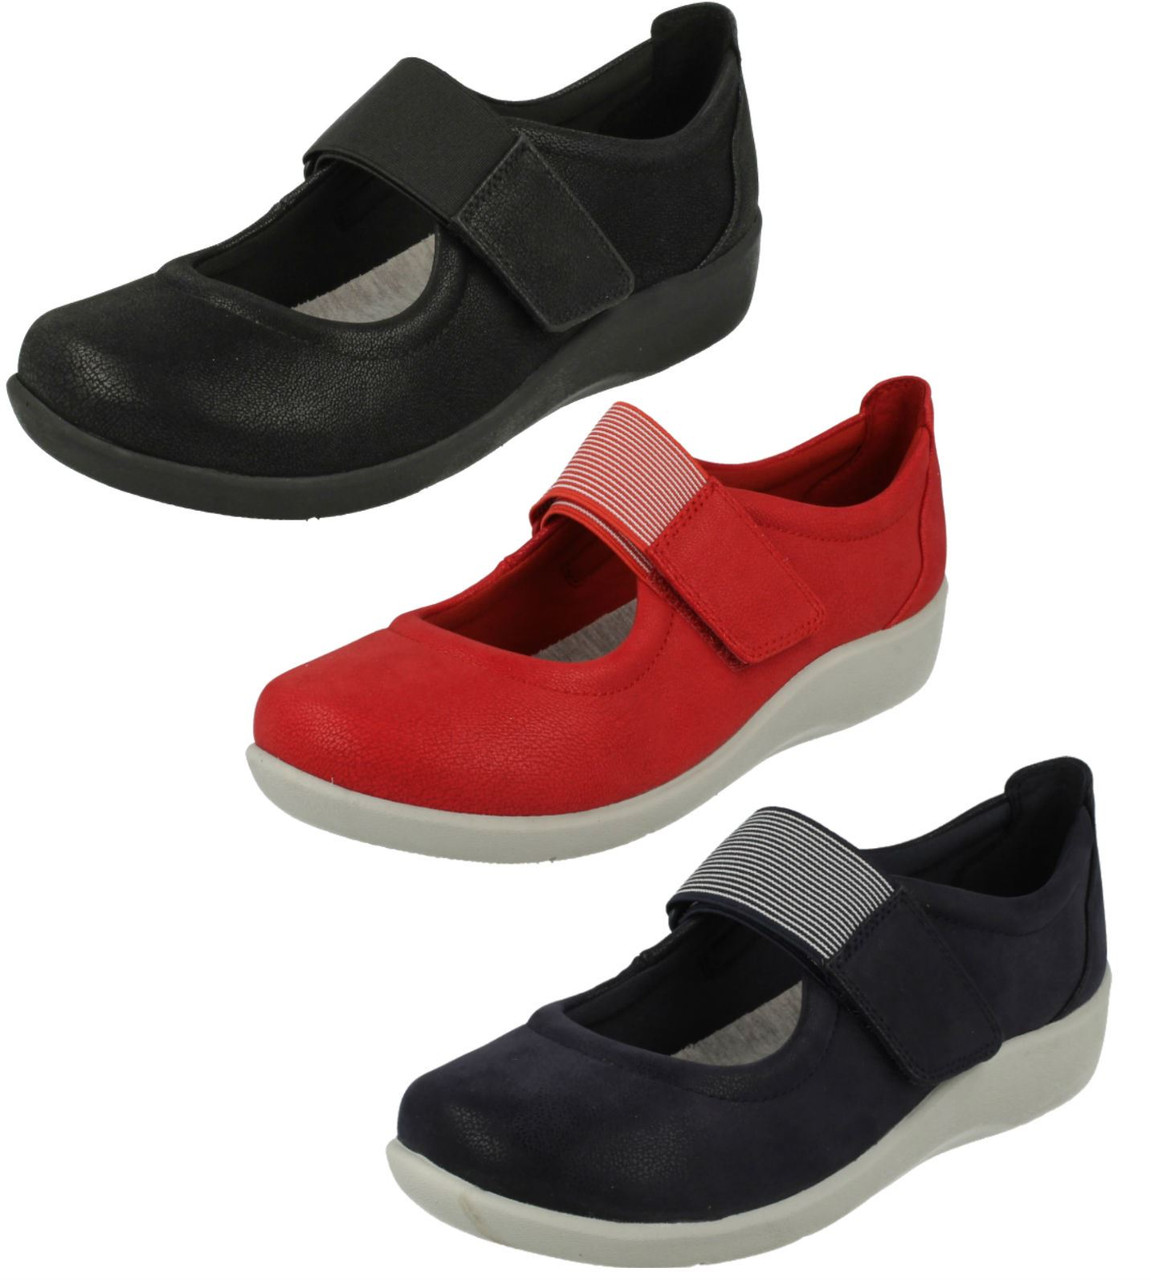 Ladies Clarks Cloudsteppers Casual Flat Shoes Sillian Cala